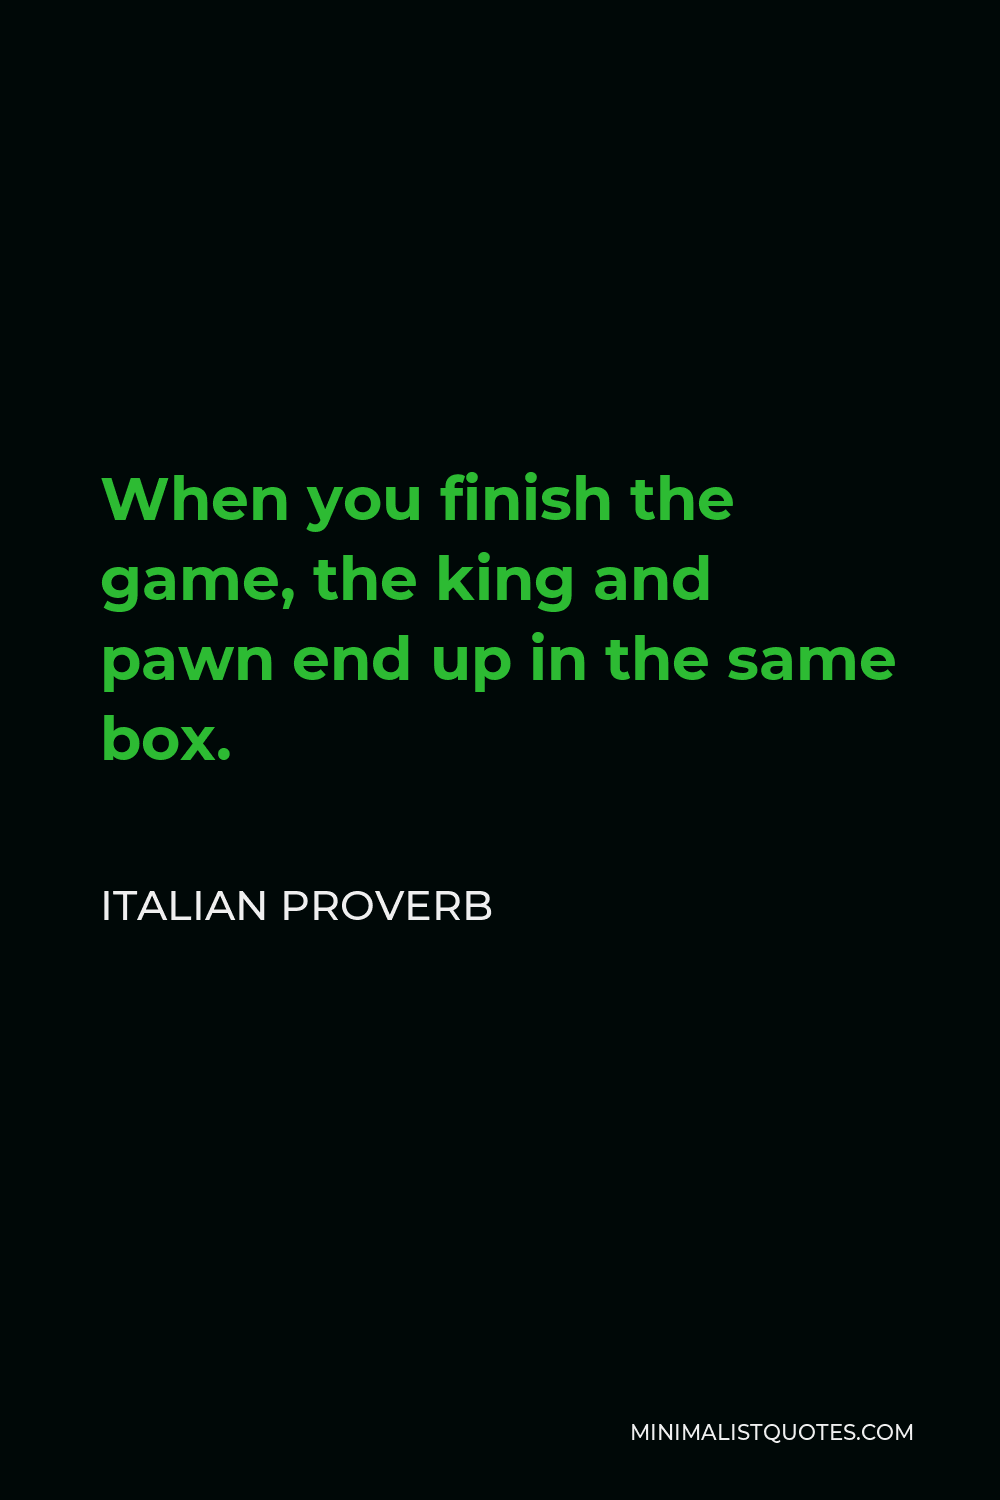 Italian Proverb Quote - When you finish the game, the king and pawn end up in the same box.